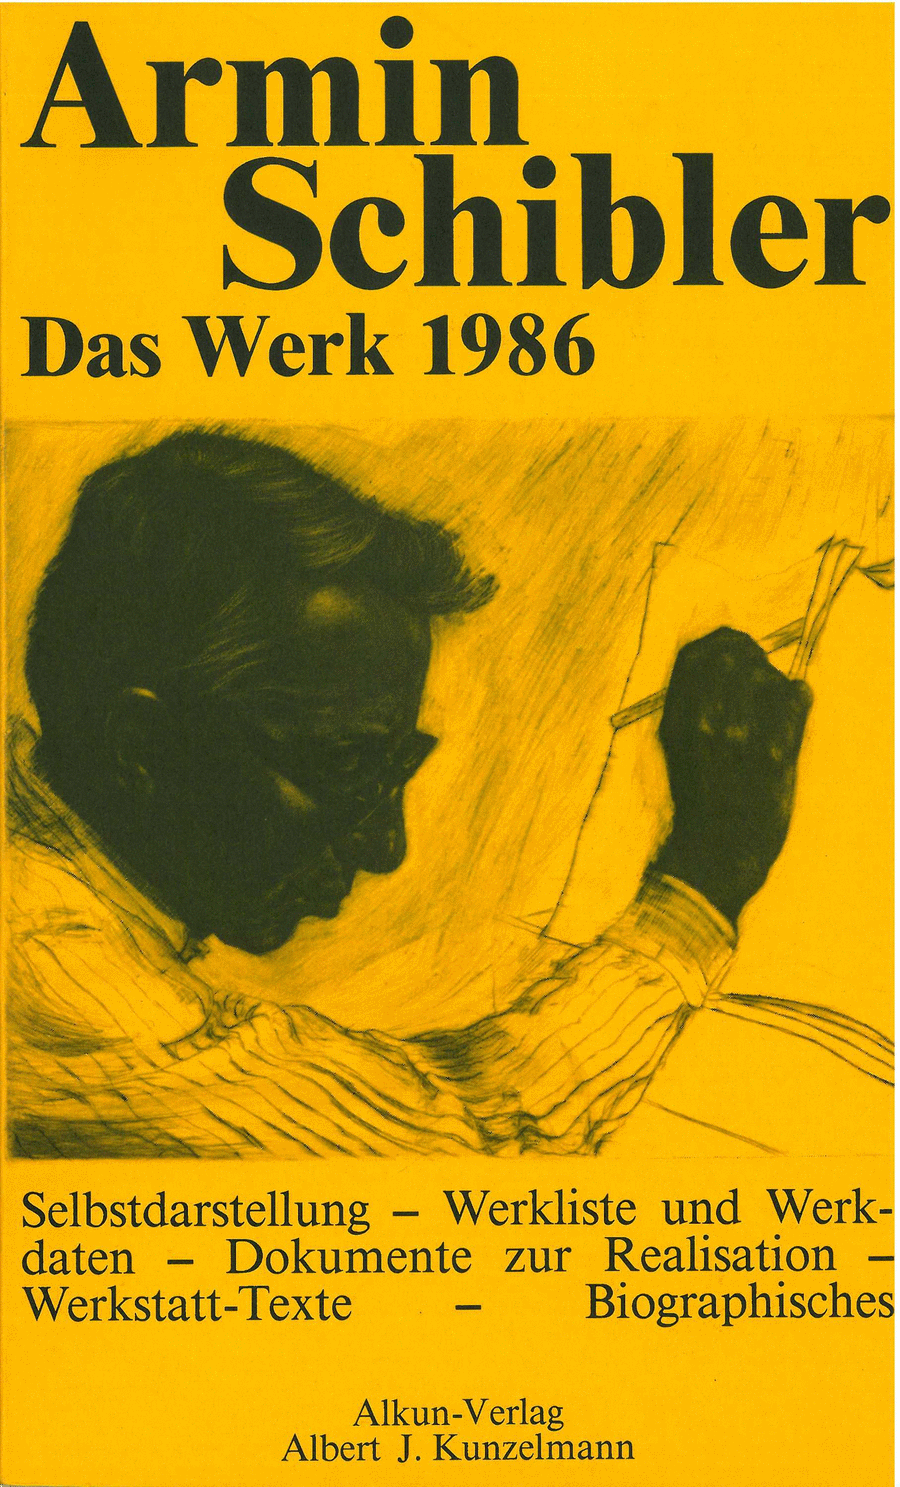 The work 1986